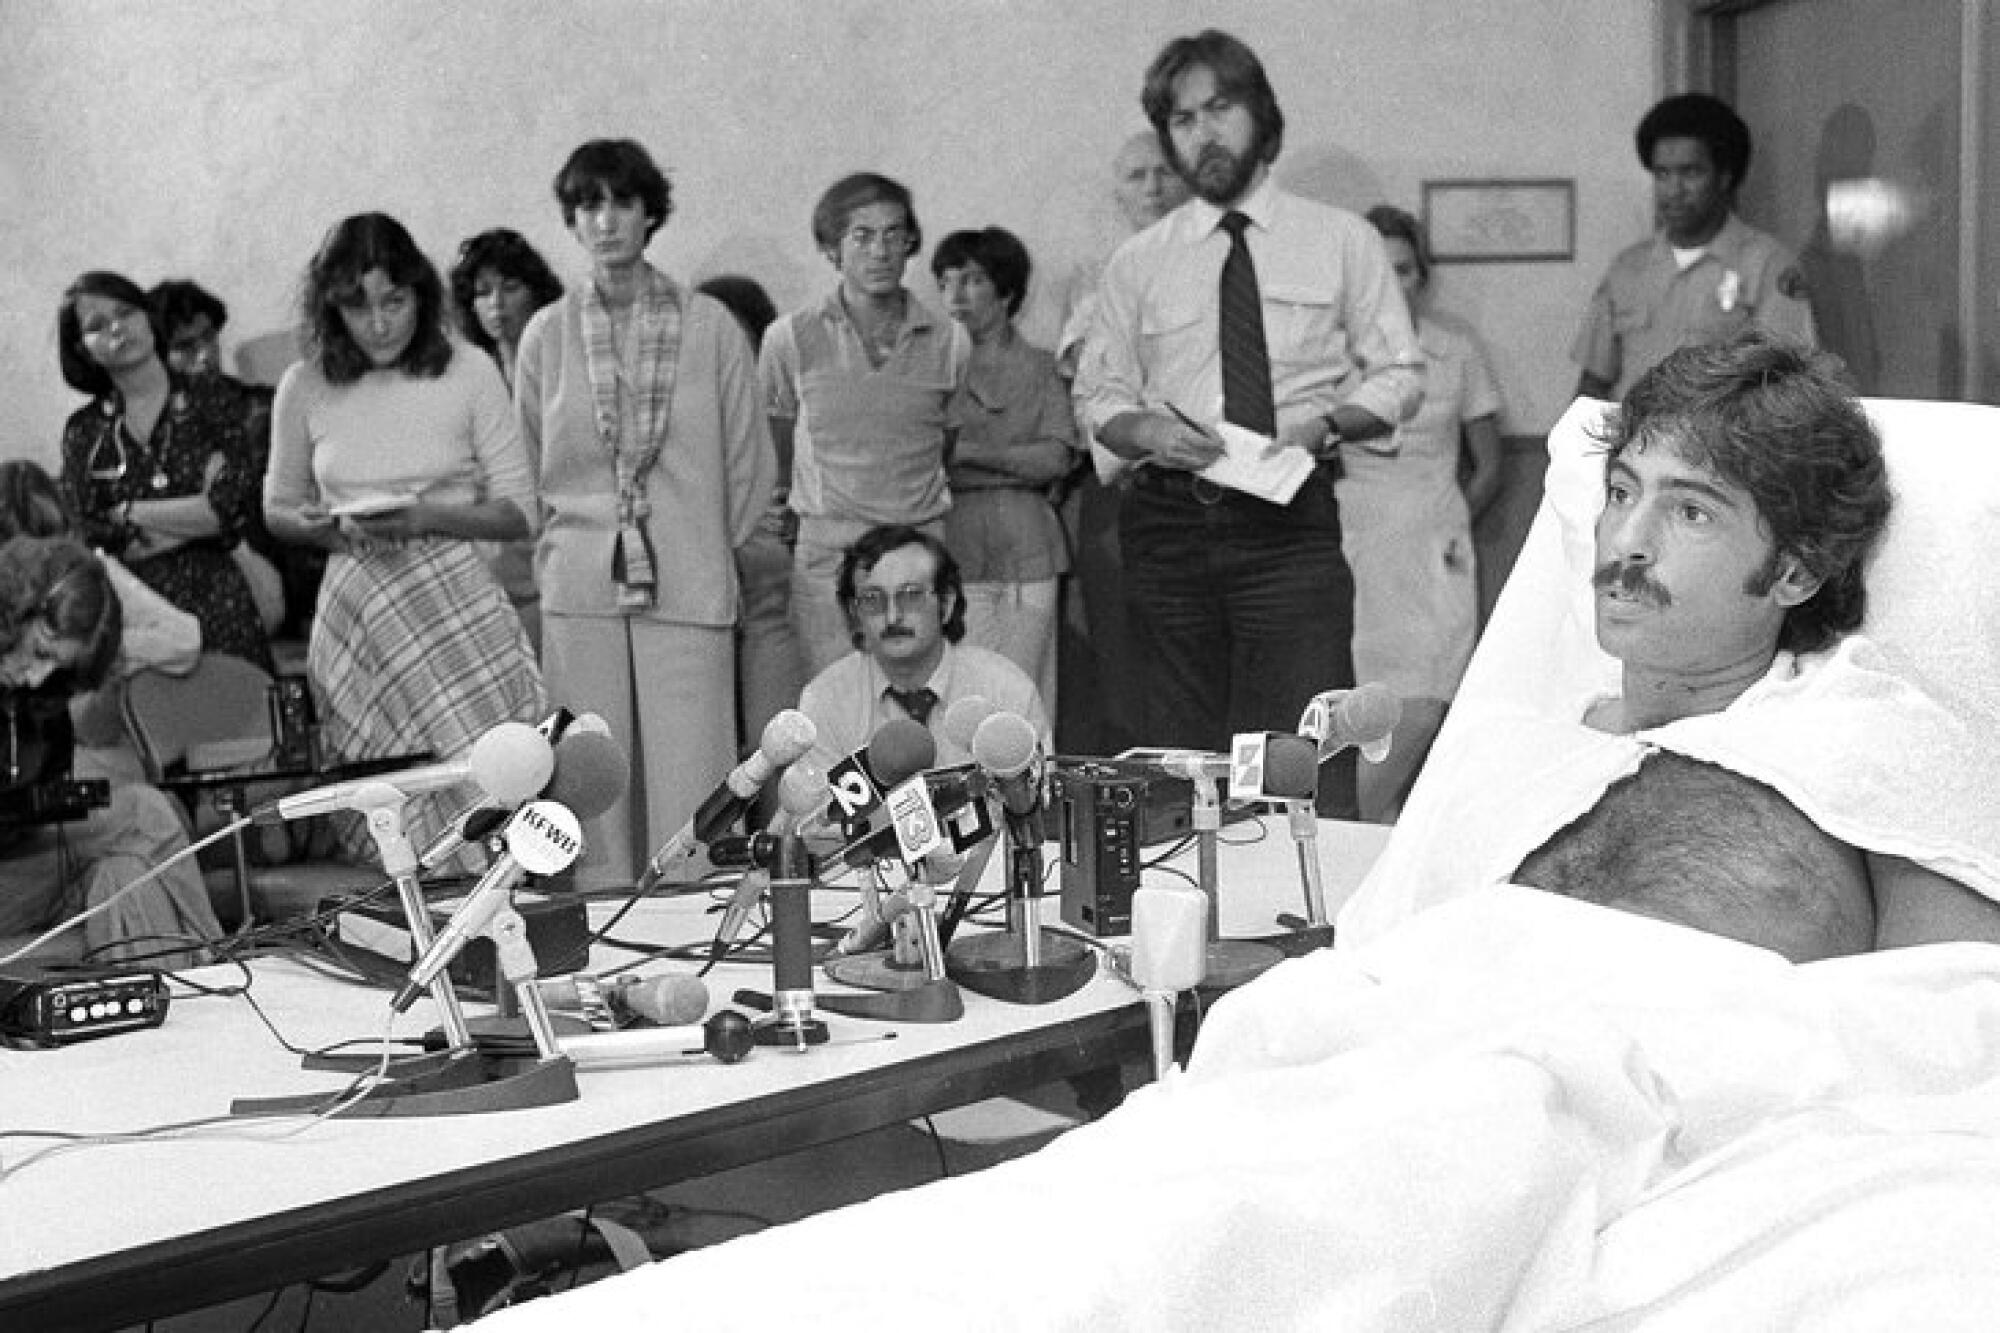 A man in a hospital bed is next to a desk full of microphones, with people standing in the background.